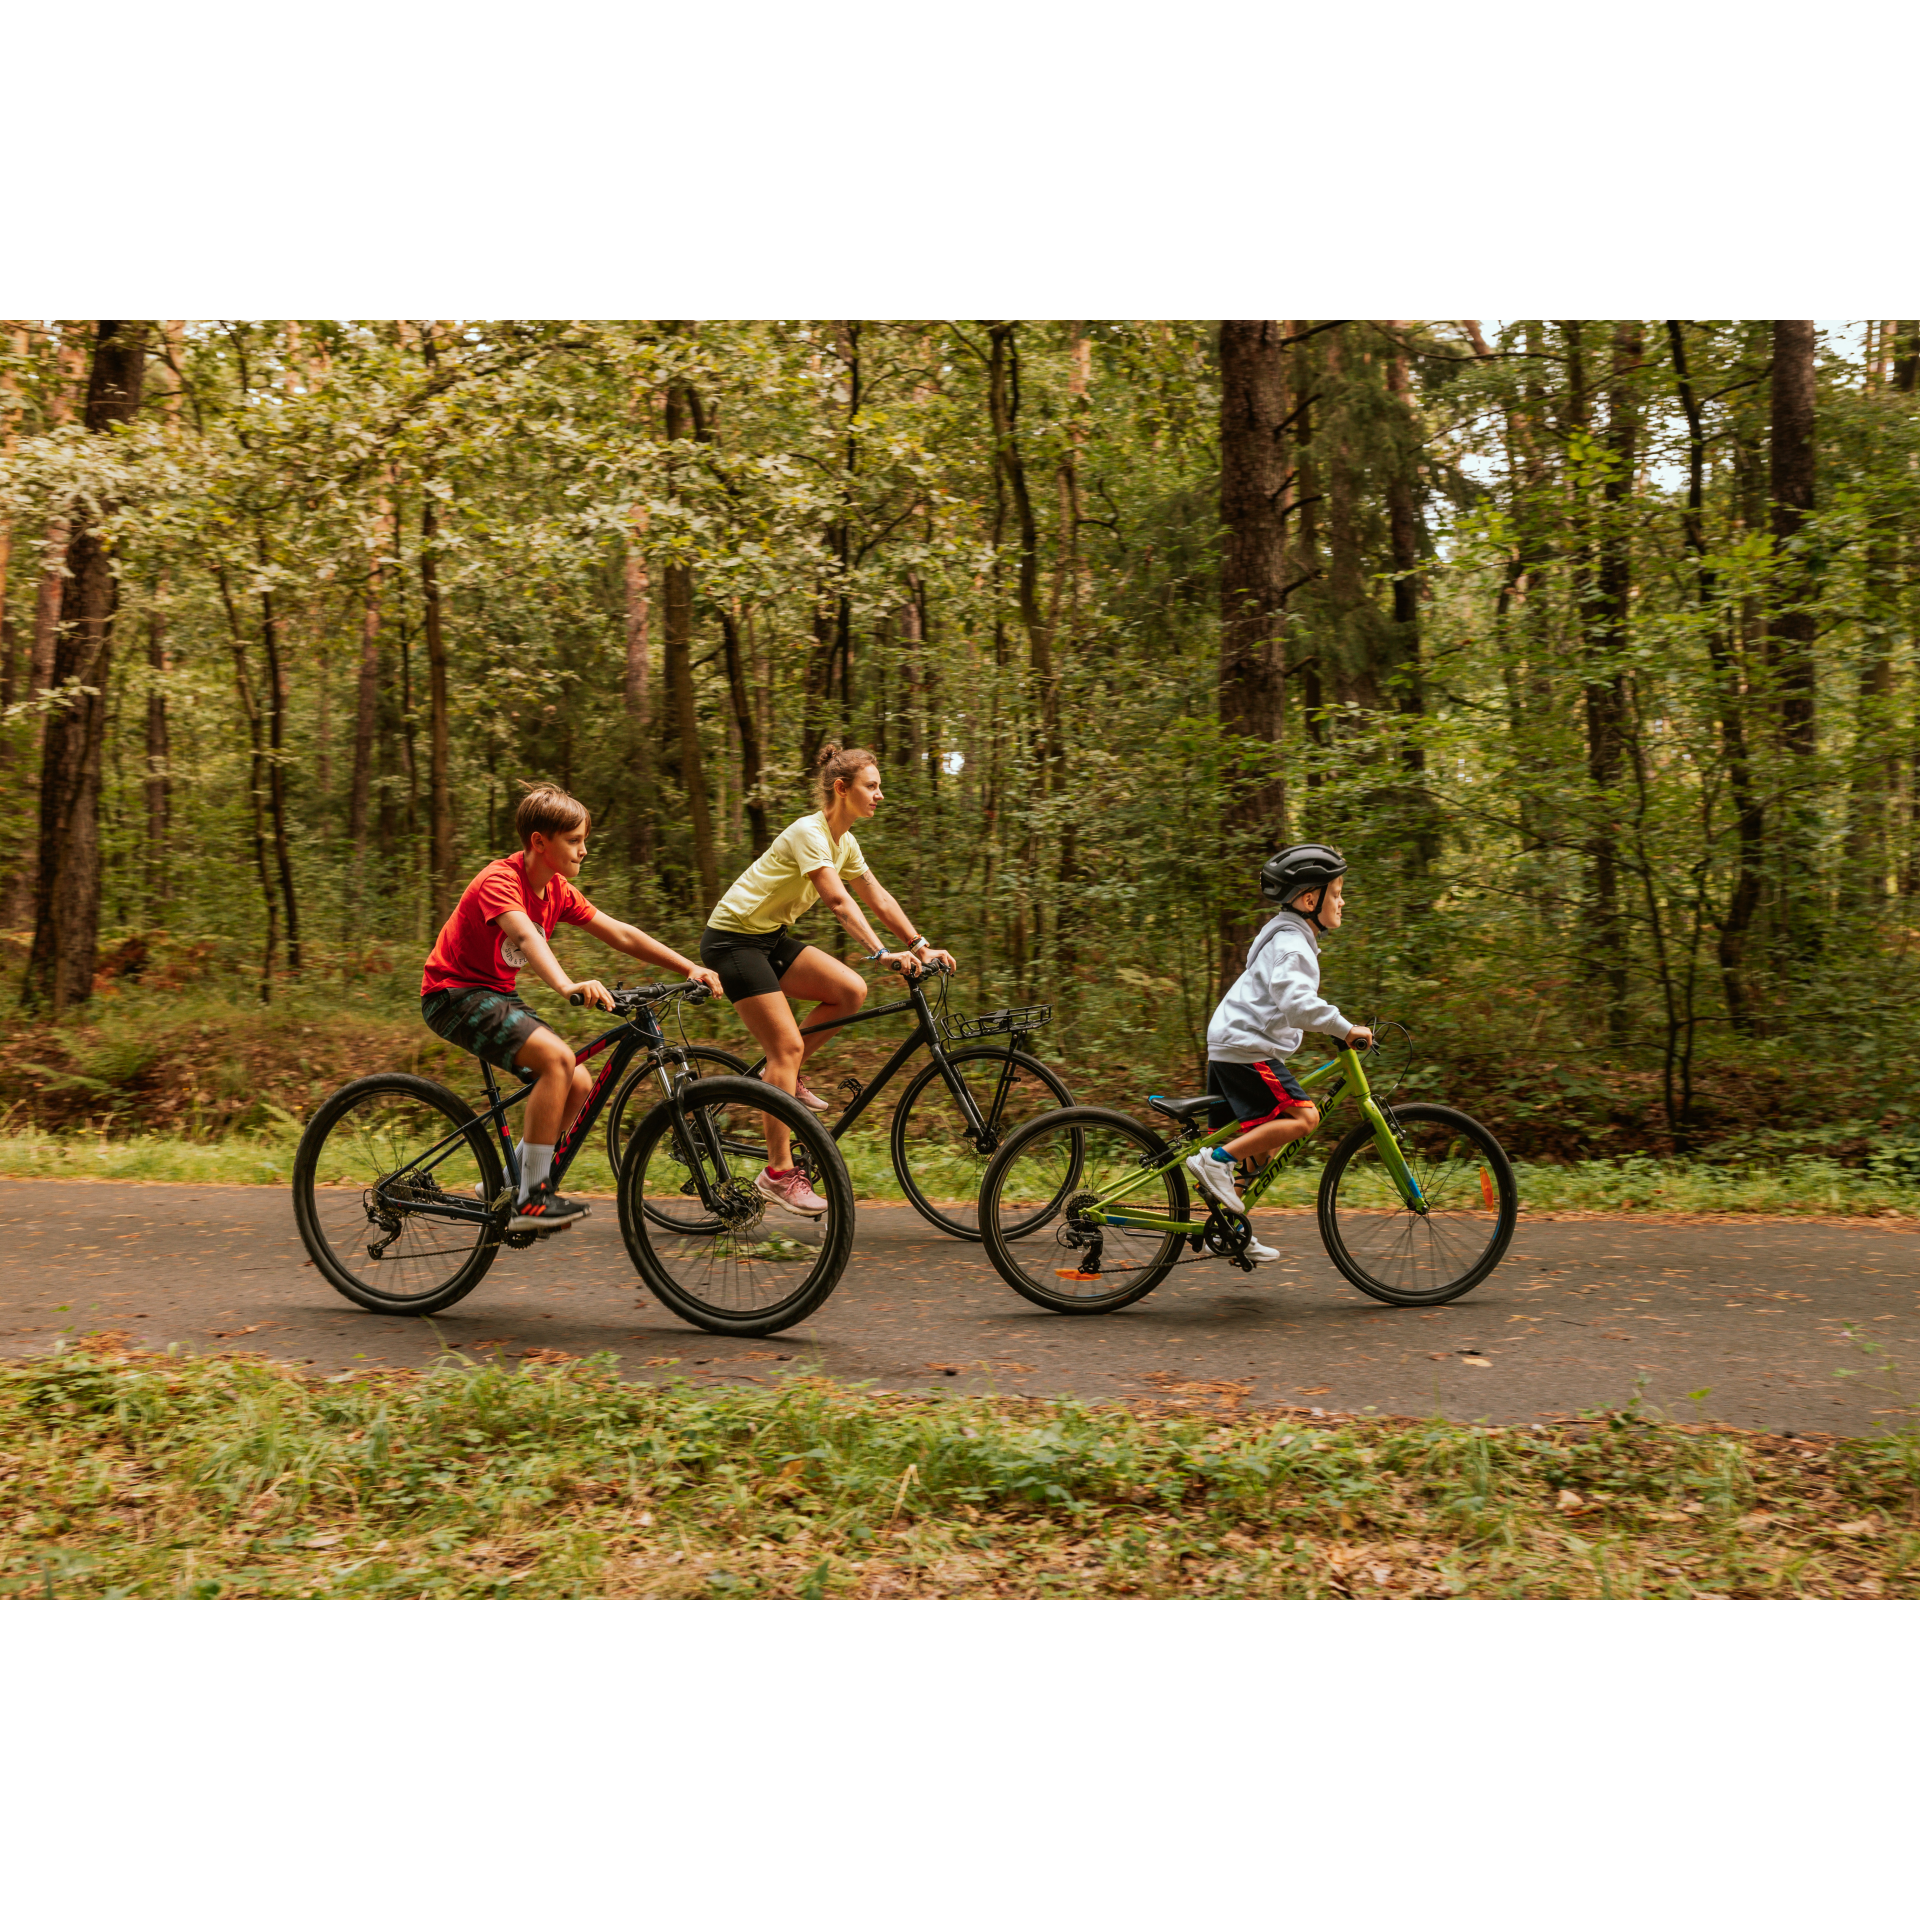 Cyclists in the forest